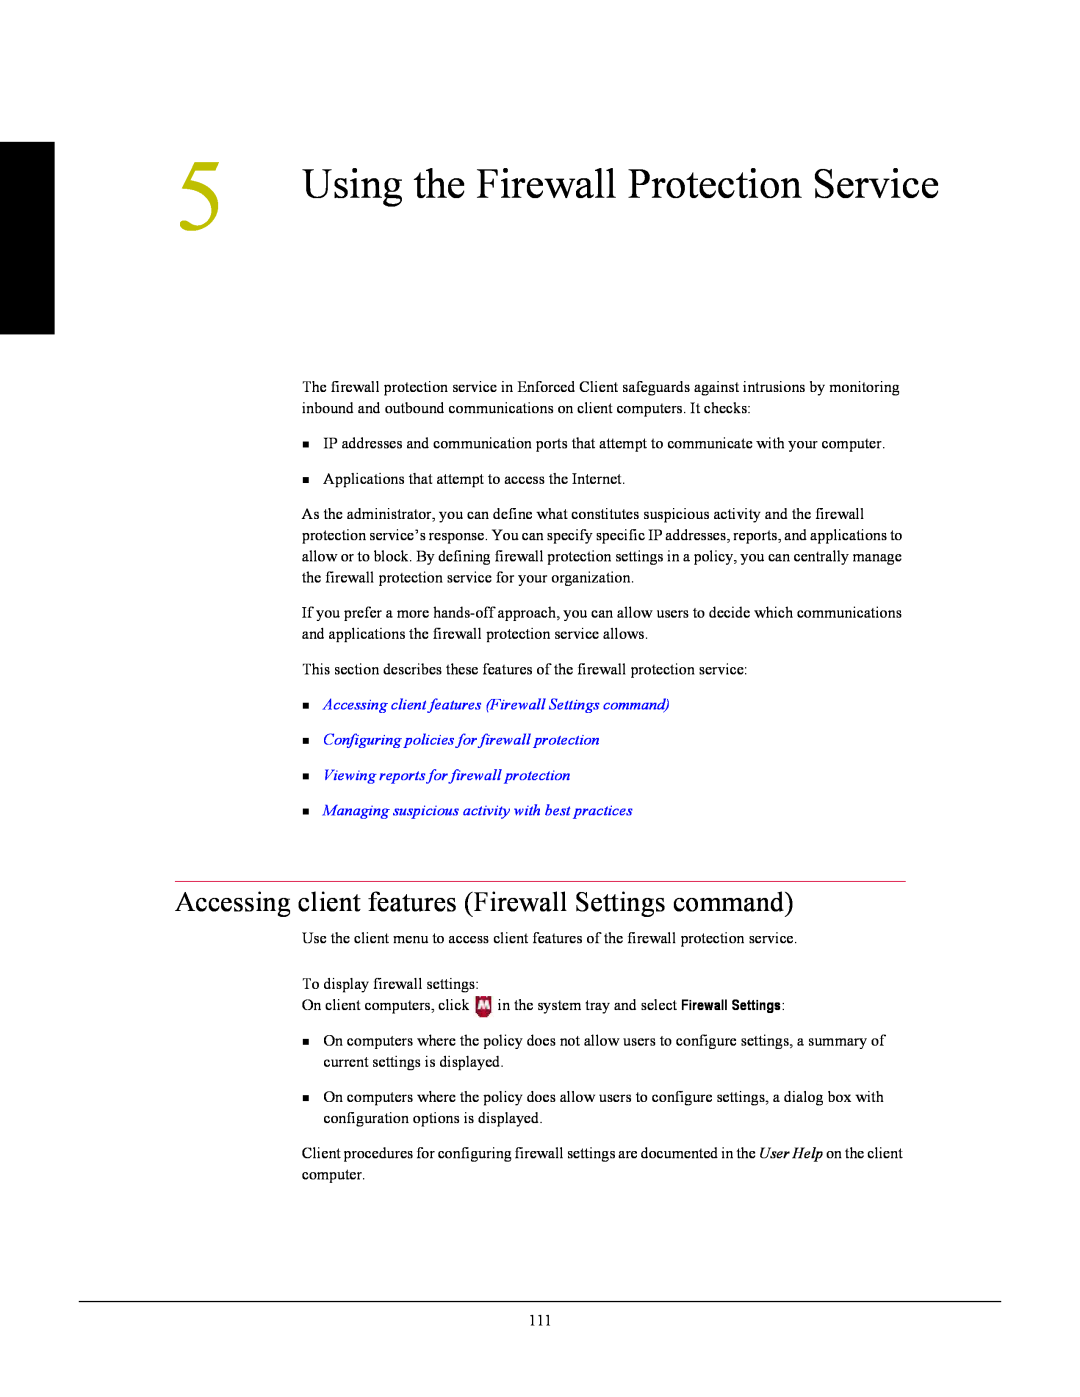 SonicWALL 4.5 manual Using the Firewall Protection Service, Accessing client features Firewall Settings command 